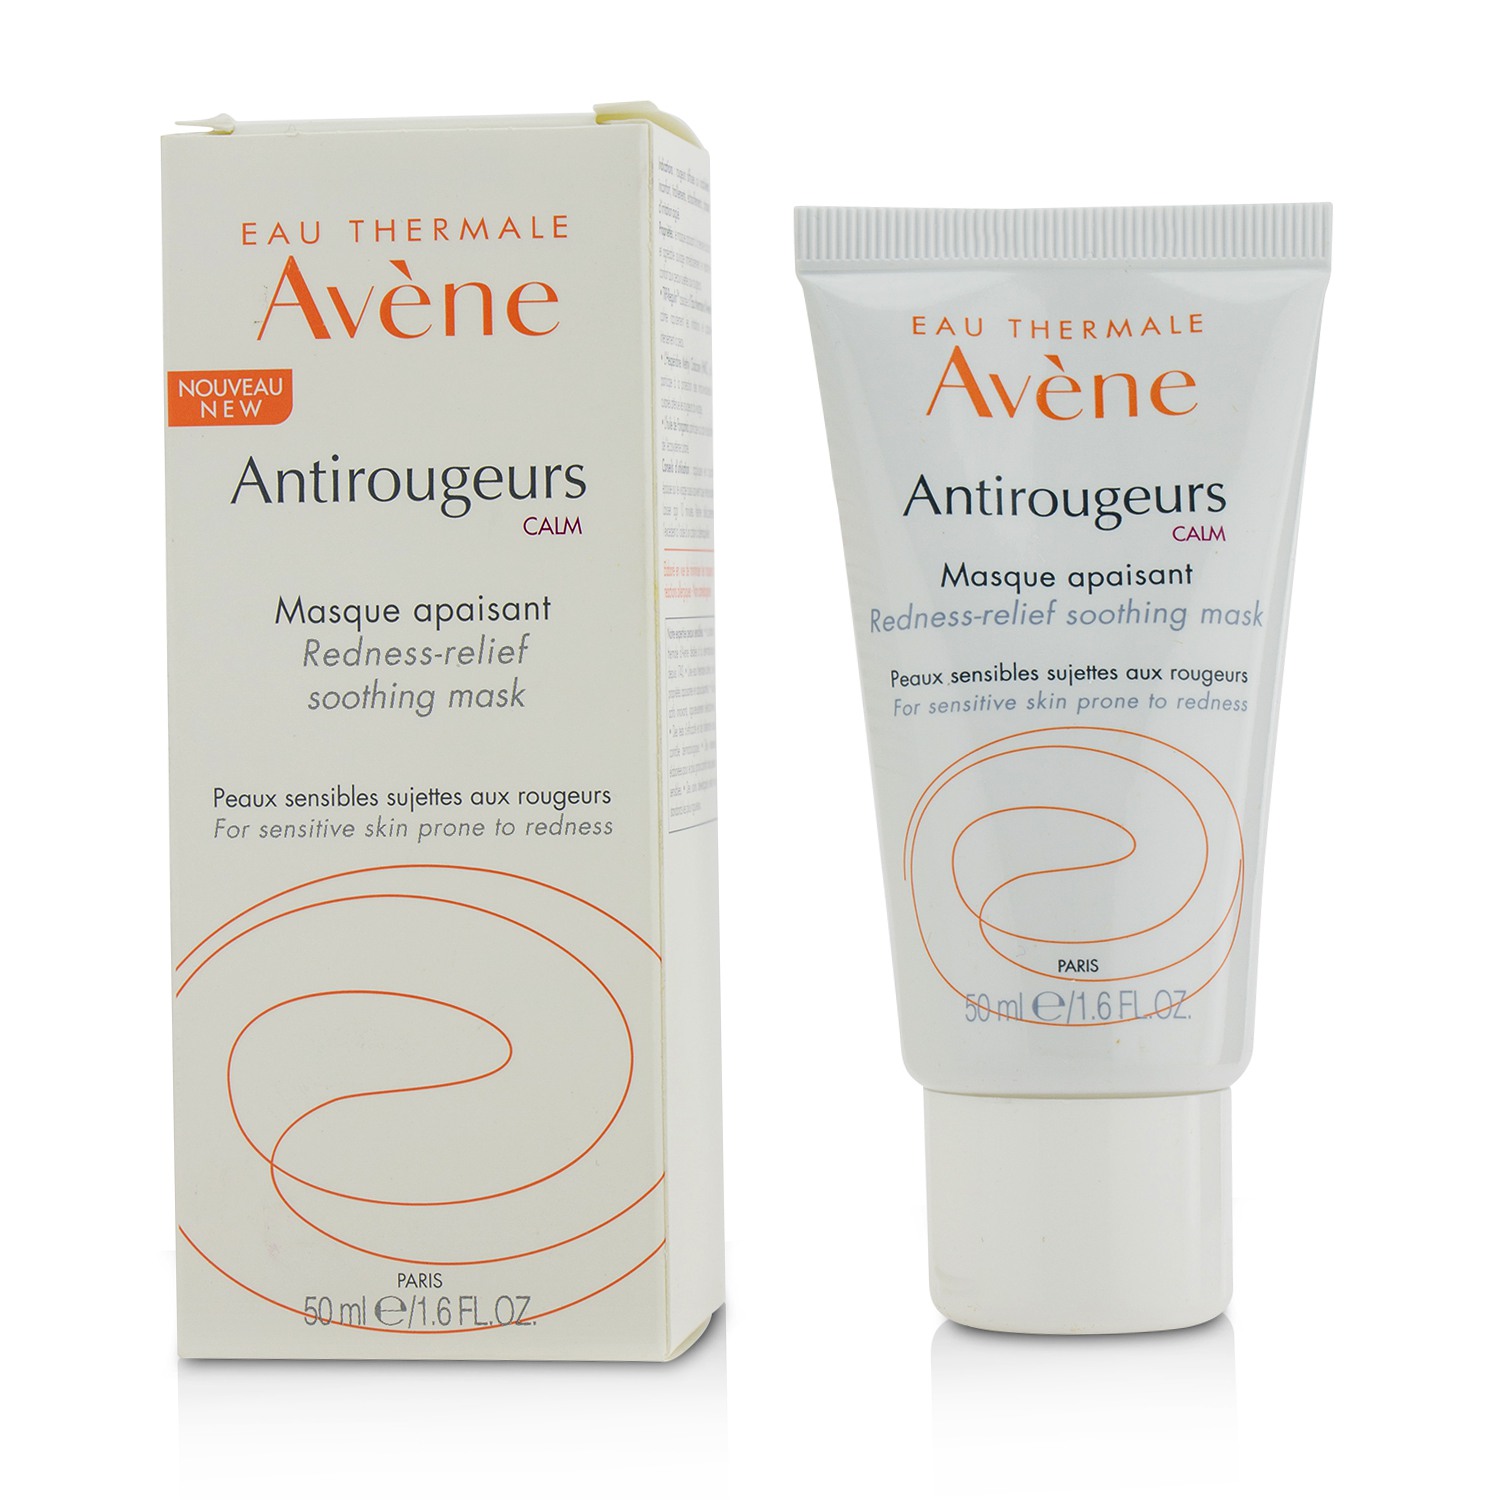 Antirougeurs Calm Redness-Relief Soothing Mask - For Sensitive Skin Prone to Redness Avene Image